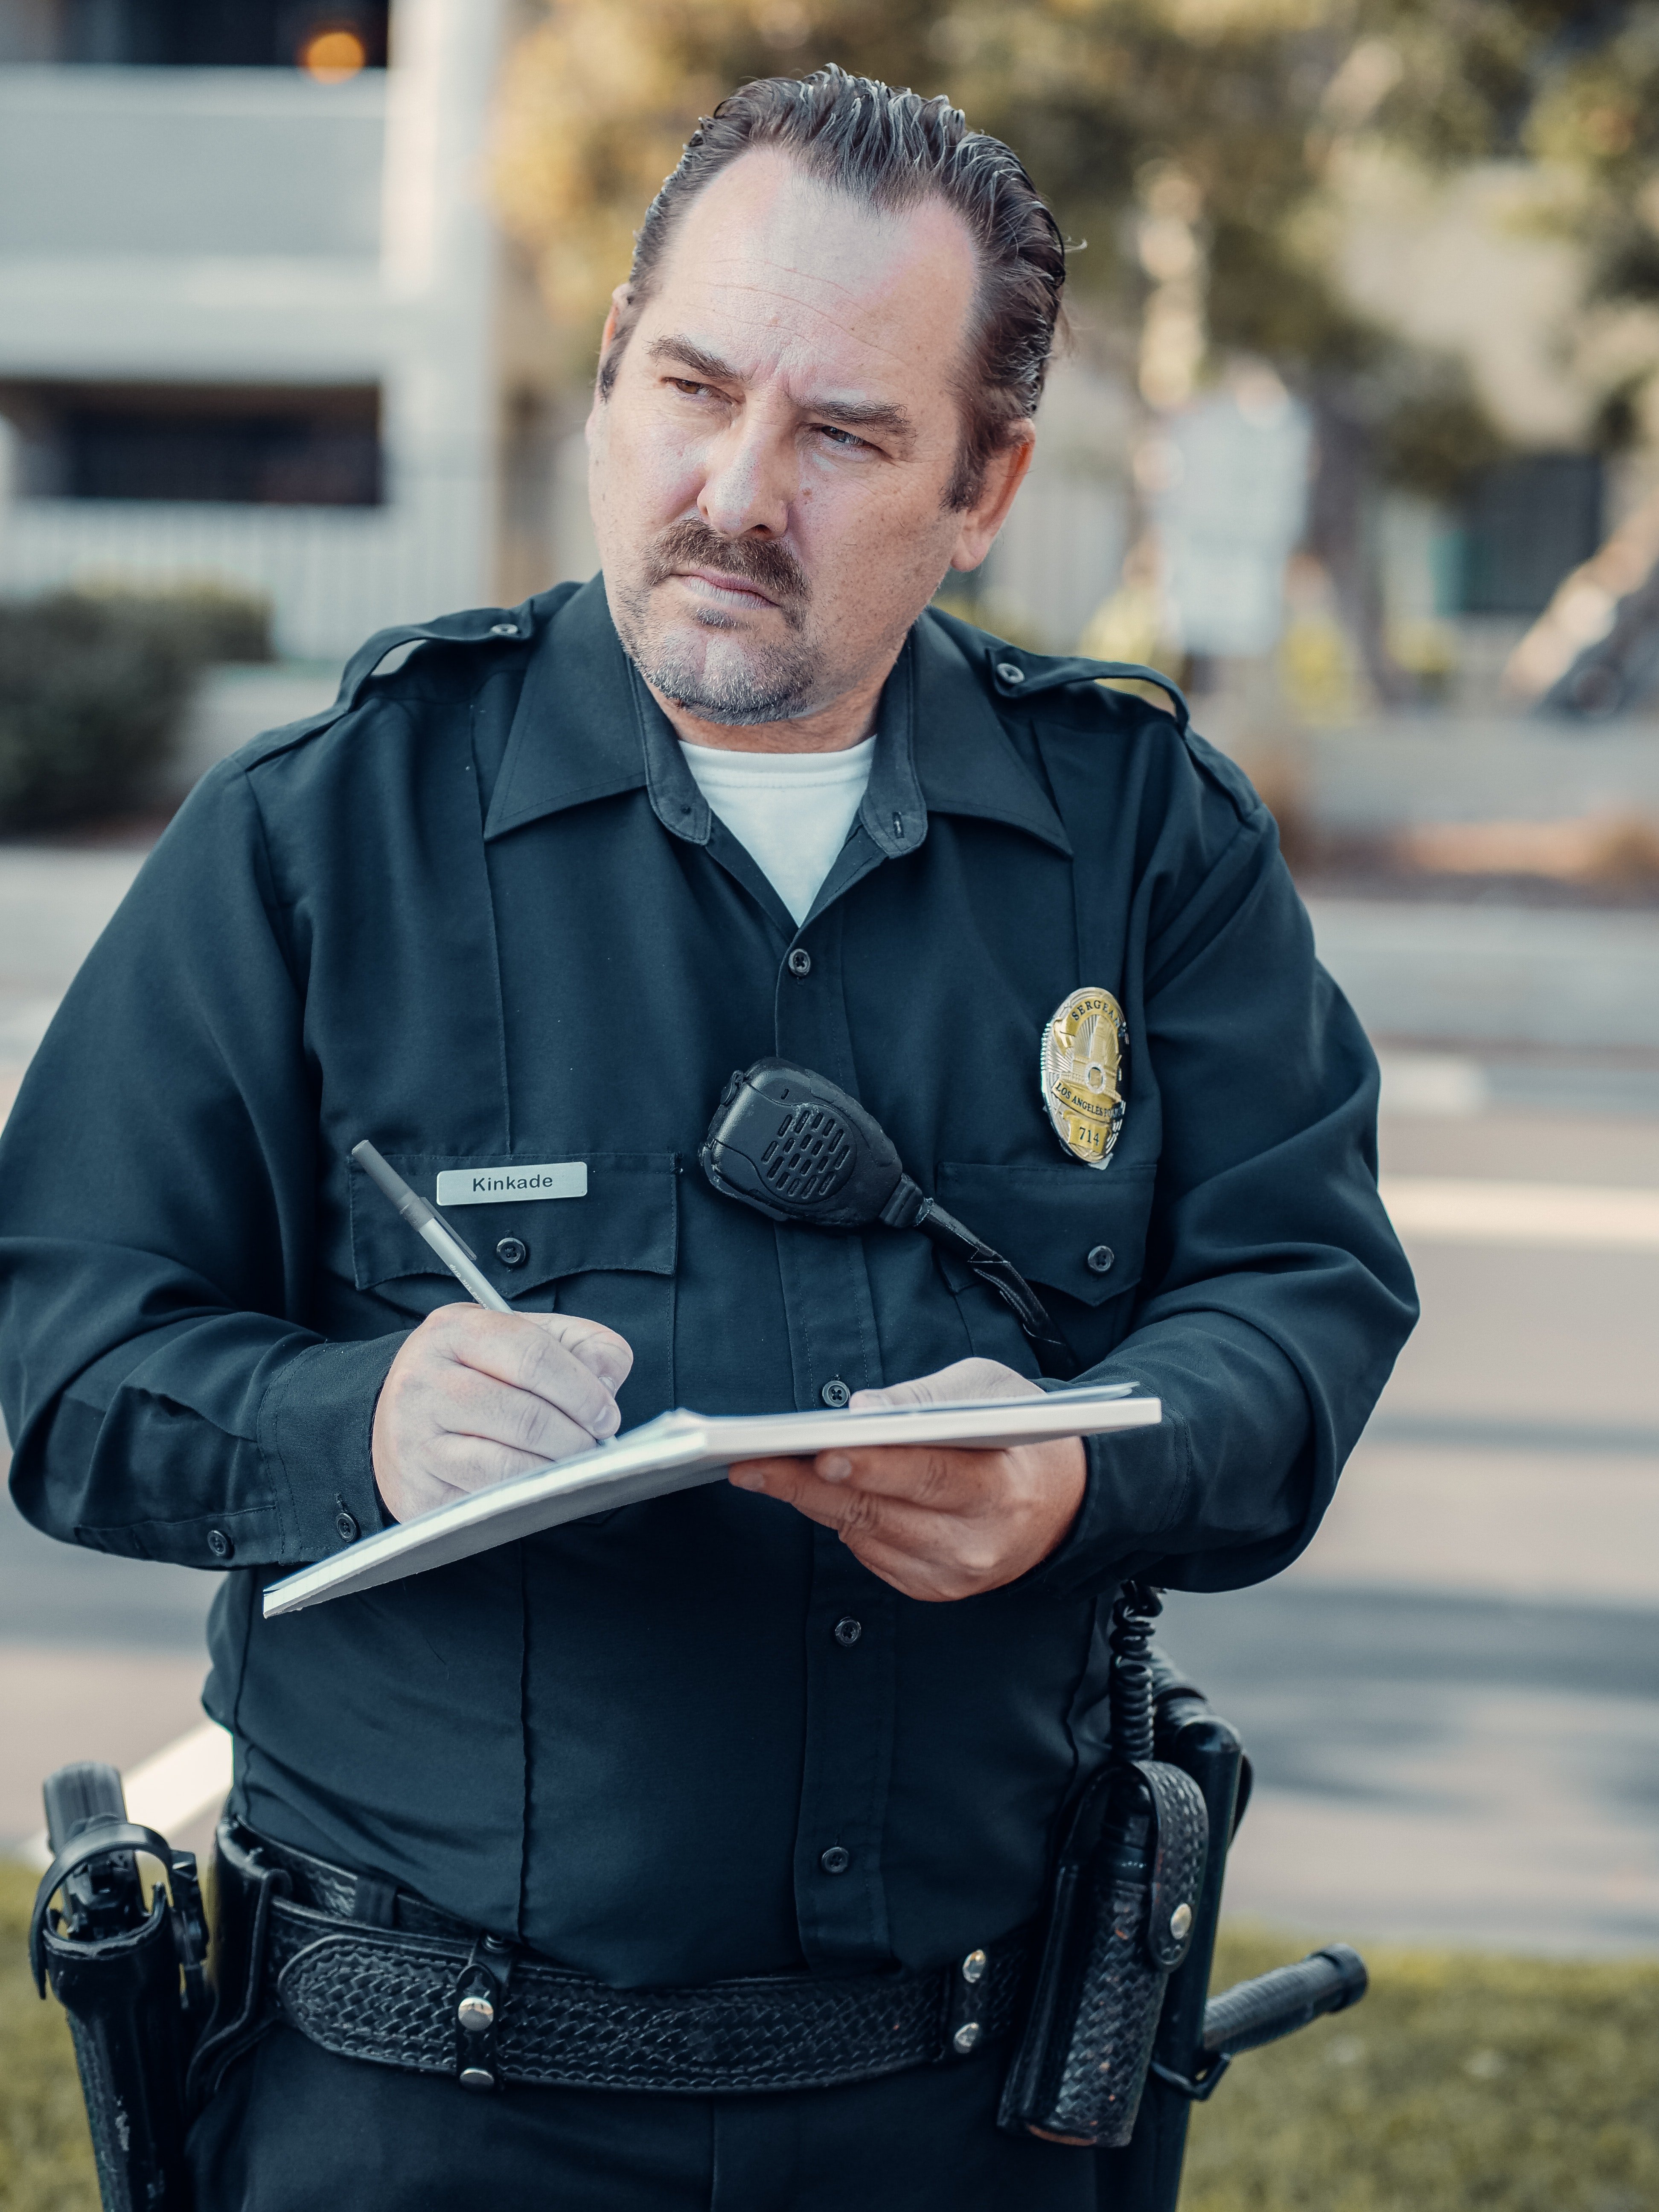 Officer Winston's partner wanted to arrest Jimmy. | Source: Pexels